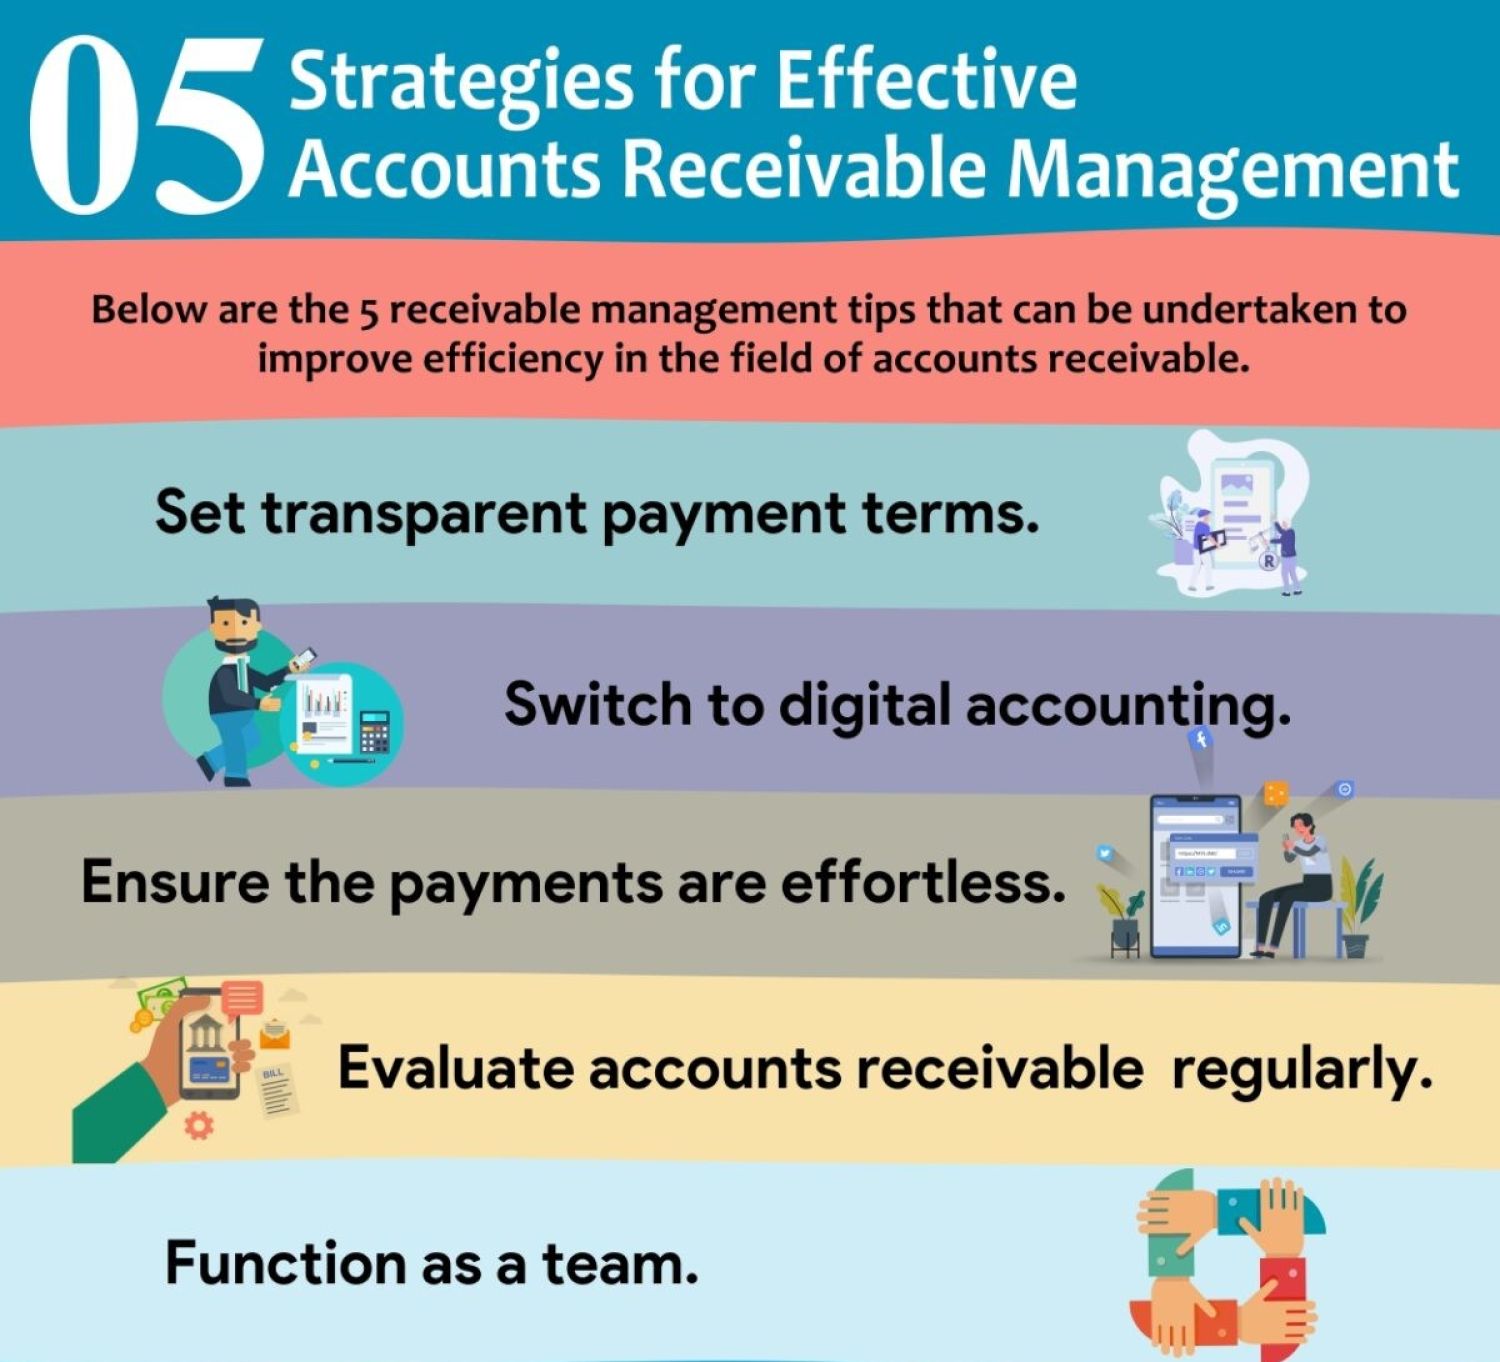 Overview on Effective Accounts Receivable Management Strategies